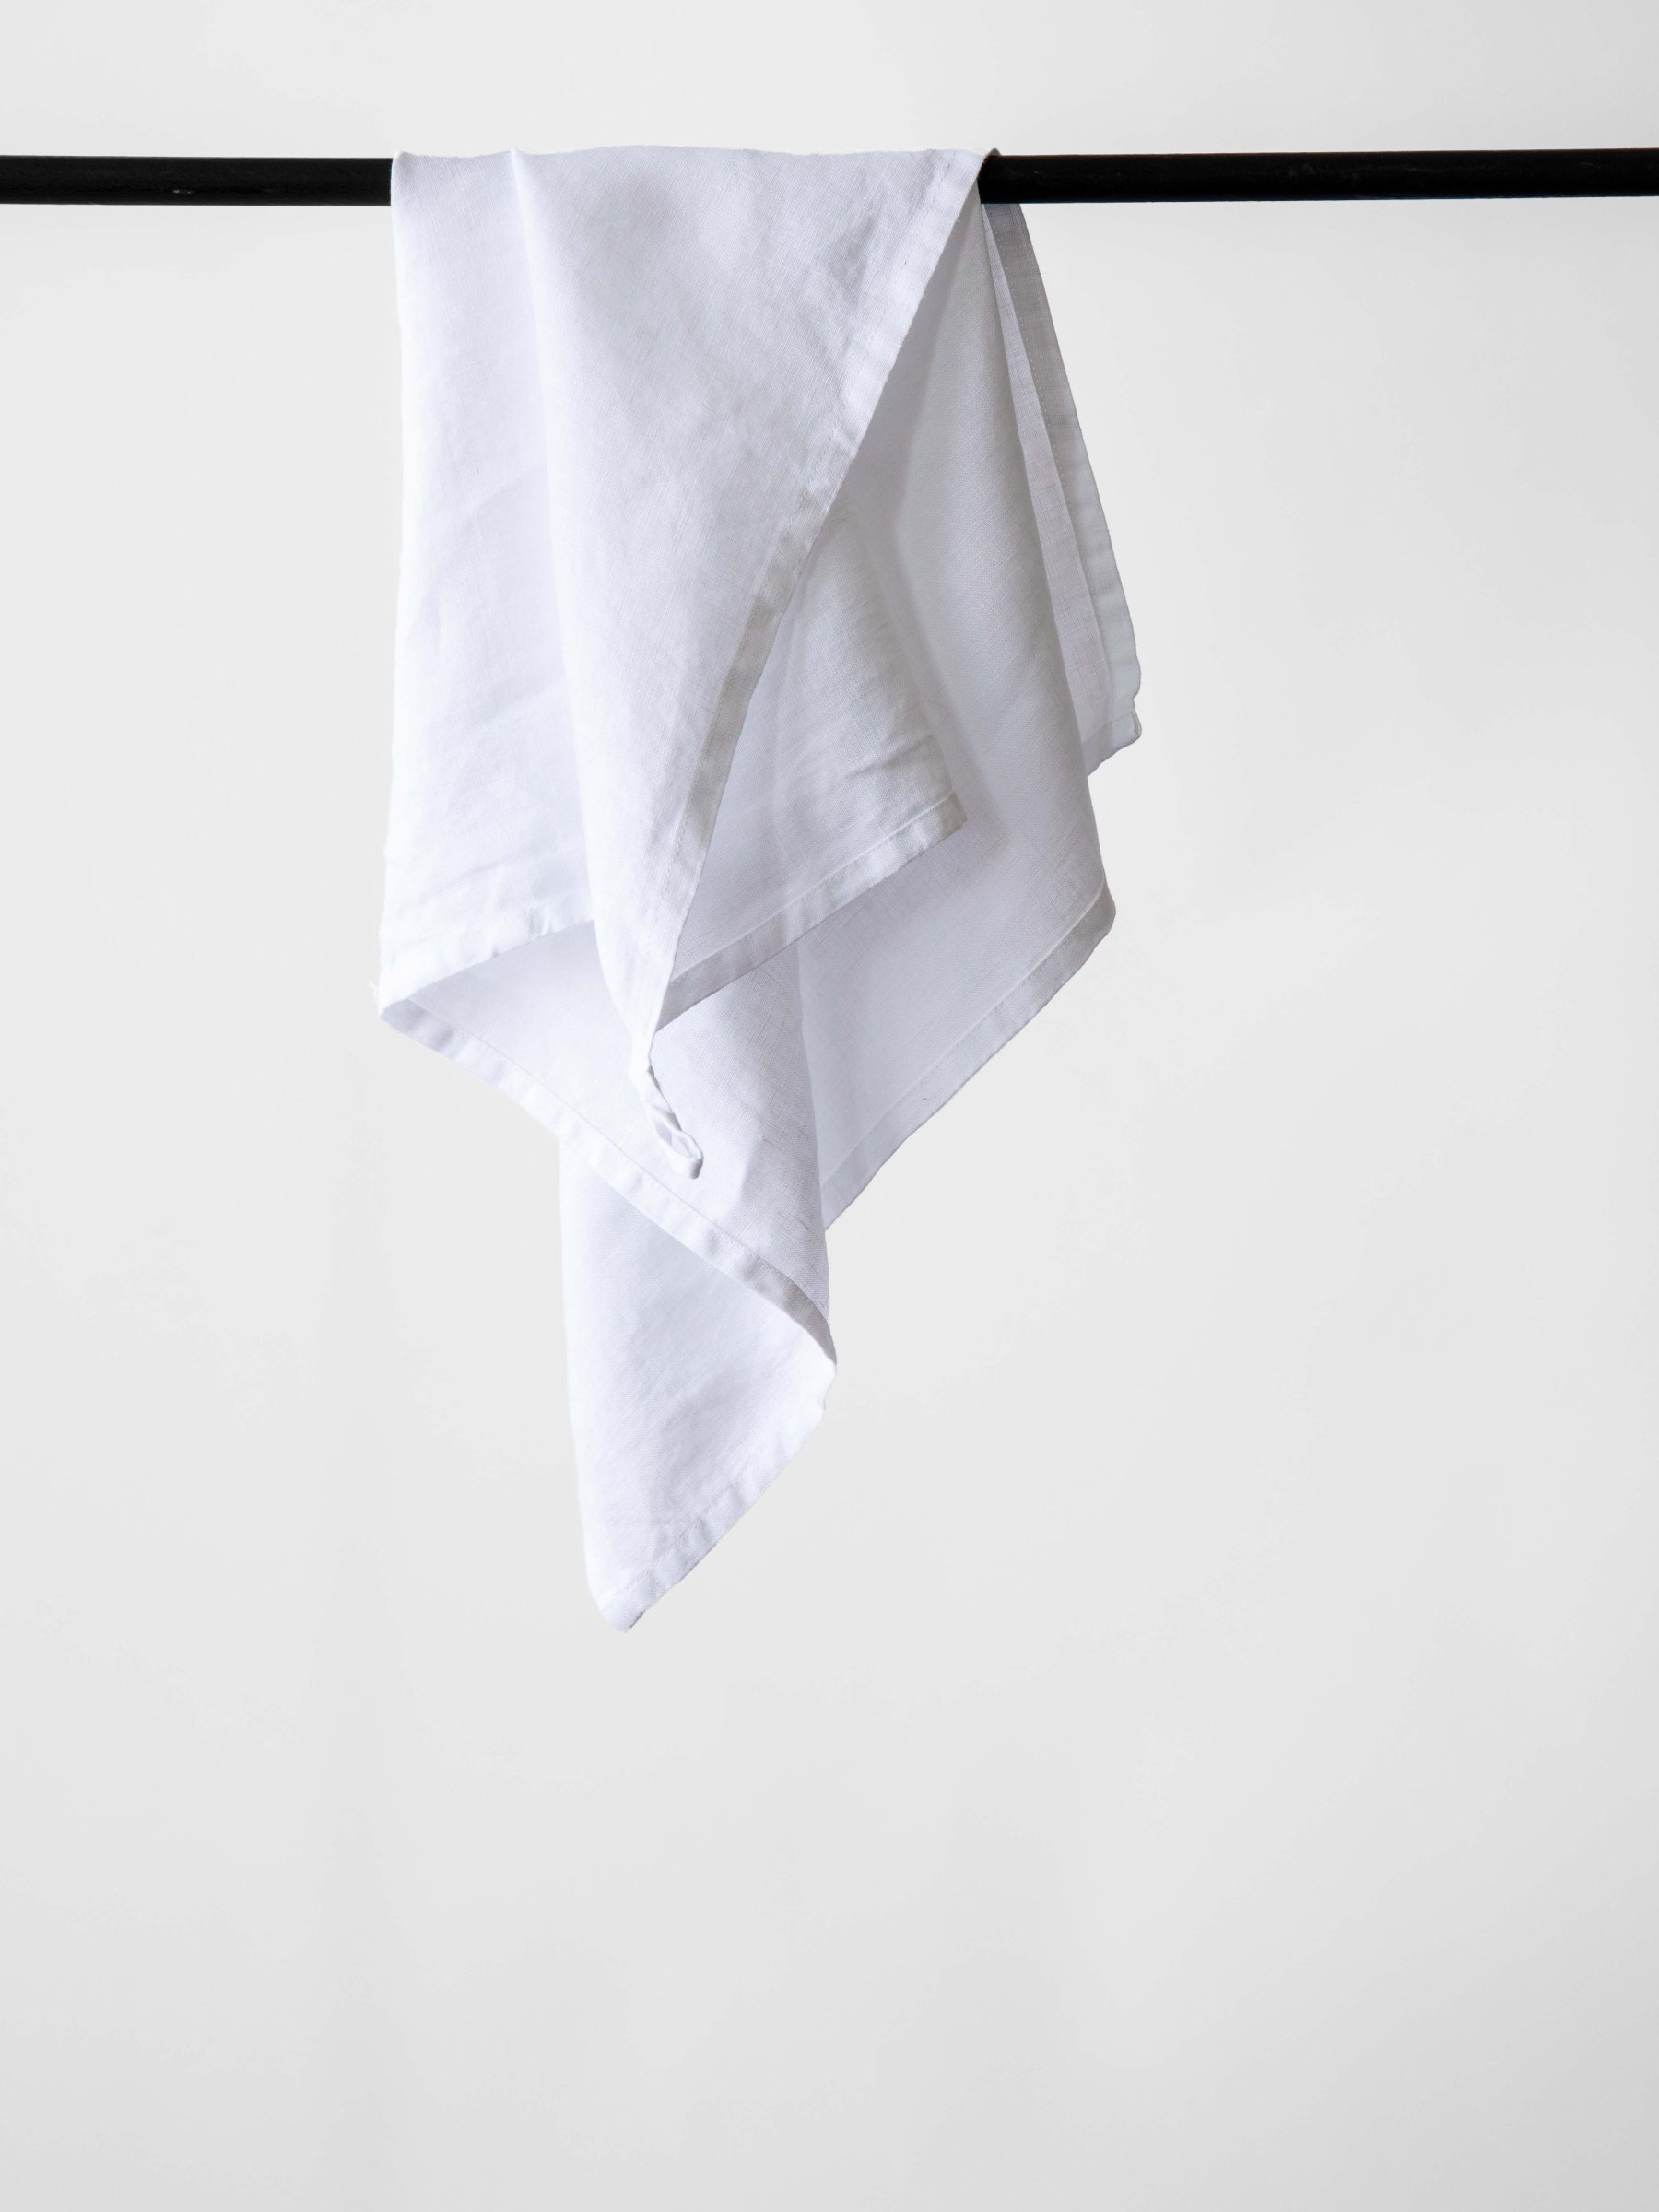 https://www.nordicnest.com/assets/blobs/tell-me-more-tell-me-more-kitchen-towel-linen-50x70-cm-bleached-white/588048-01_20_ProductImageExtra-5c0dd432d6.png